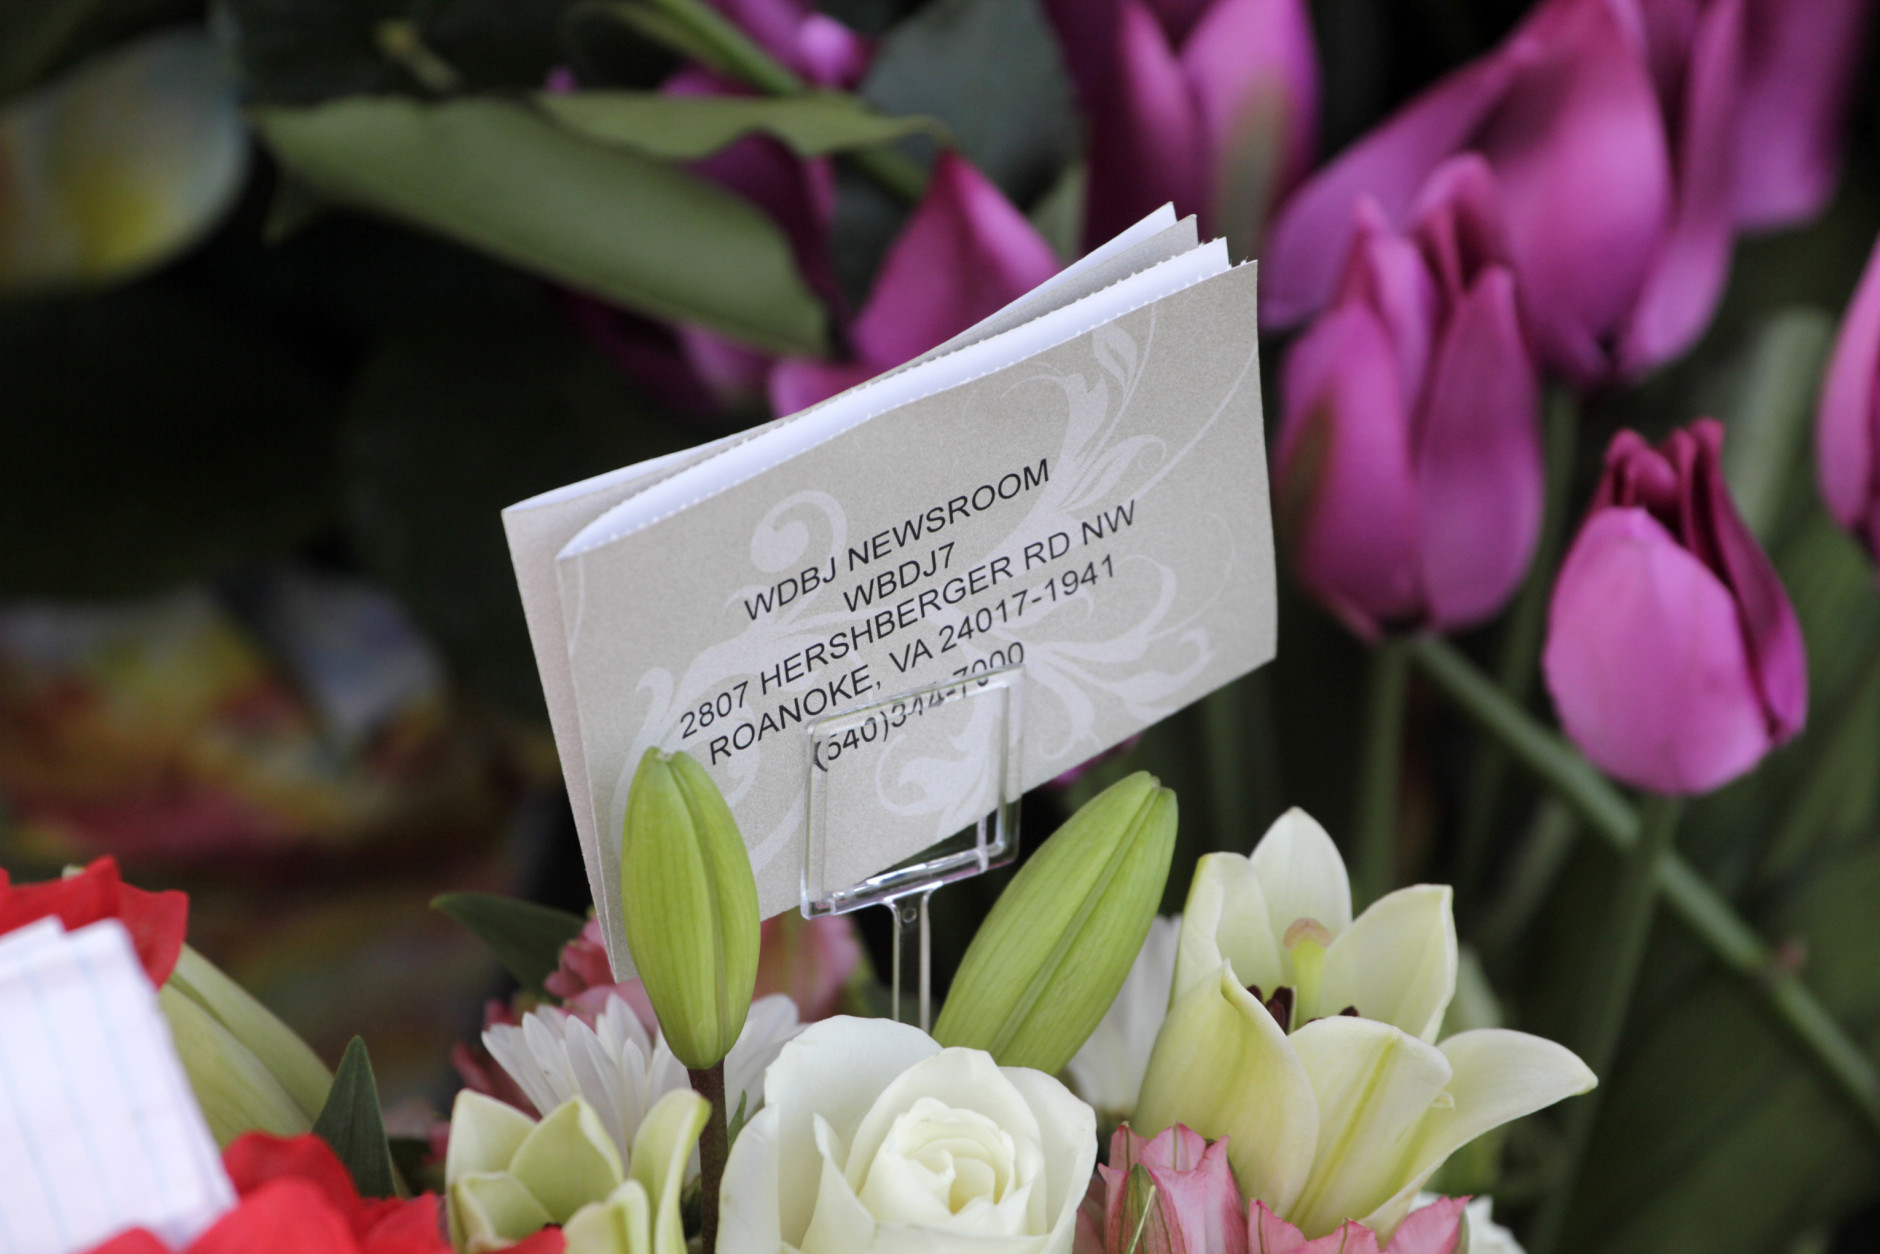 ROANOKE, VA - AUGUST 26: Flowers are left for the two journalists rnalist that were killed this morning during a live broadcast on August 26, 2015 in Roanoke, Virginia. Two employees of WDBJ TV were killed this morning during a live broadcast at Bridgewater Plaza on Smith Mountain Lake. The victims have been identified as reporter Alison Parker and cameraman Adam Ward. Parker, 24 and Ward, 27, worked for WDBJ in Roanoke, Virginia. The suspect, Vester Lee Flanigan, also known as Bryce Williams, died of a self-inflicted gunshot wound. (Photo by Jay Paul/Getty Images)